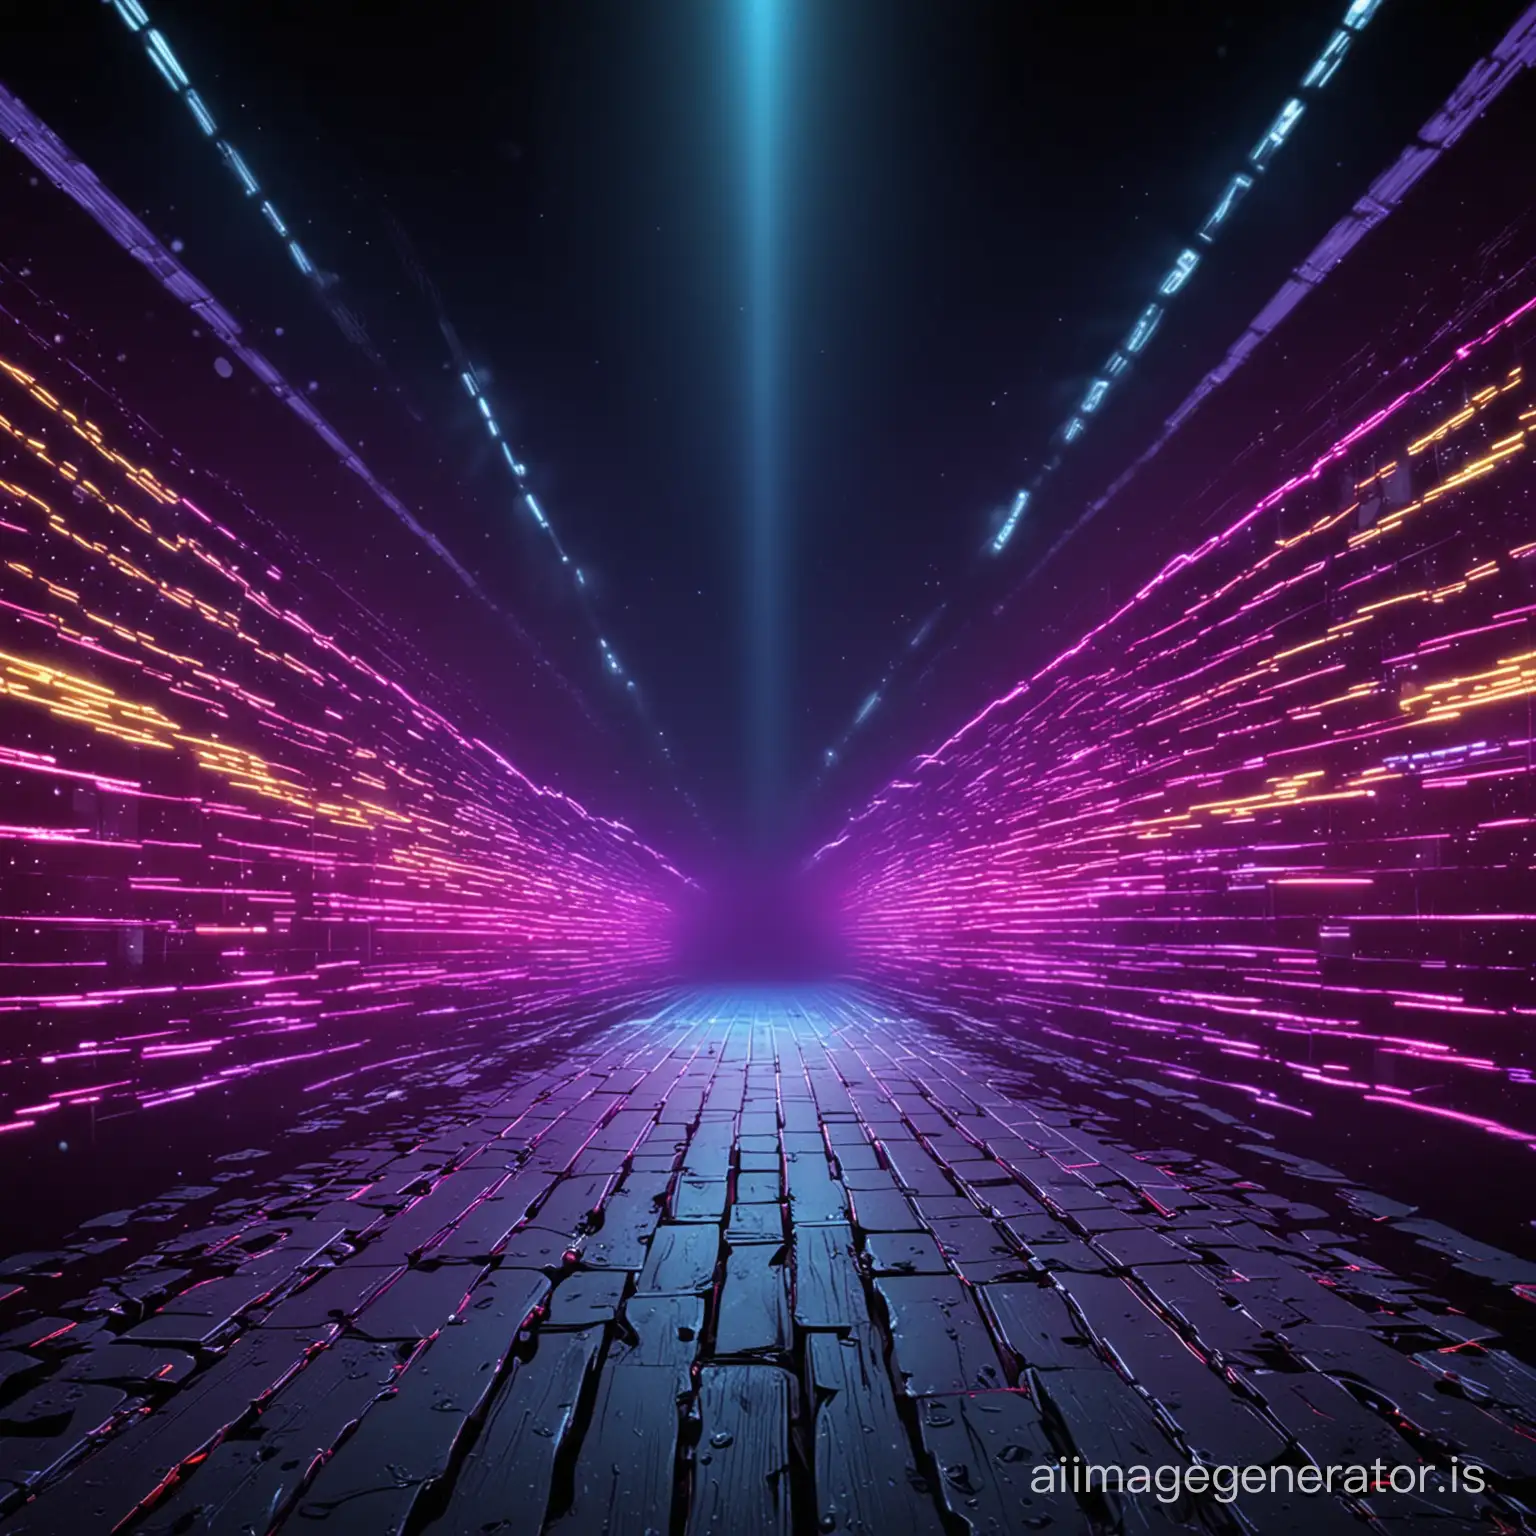 background for party flyer without text, crowd, neon track